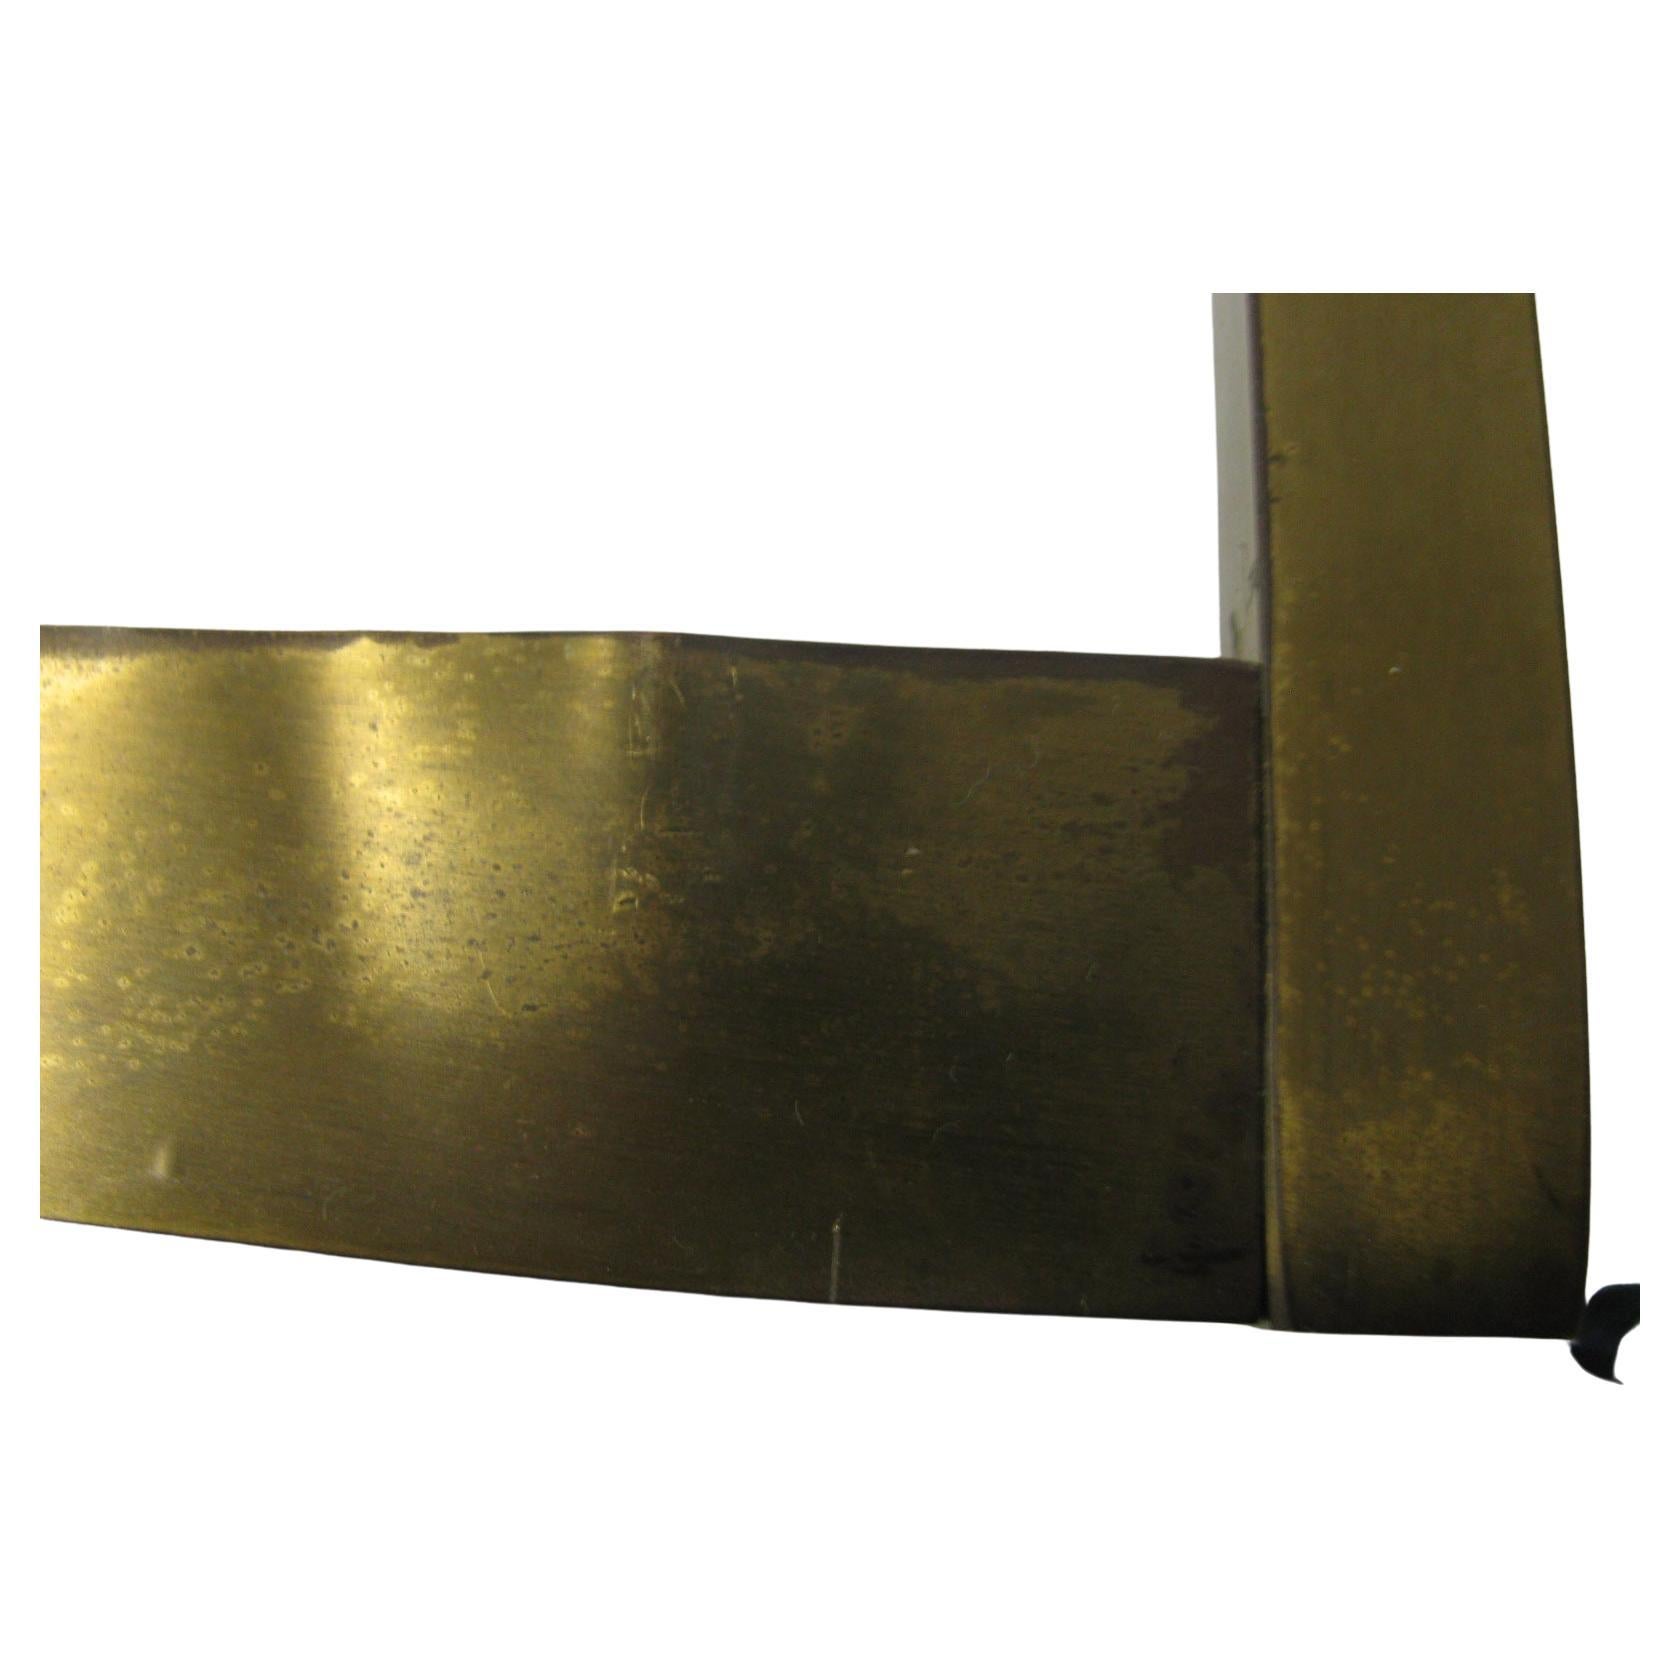 Simple and elegant square brass cocktail table by Harvey Probber. X stretcher giving an architectural element to the piece and providing strength to the frame. In very good vintage condition with a tiny blemish to the brass (pictured). Original